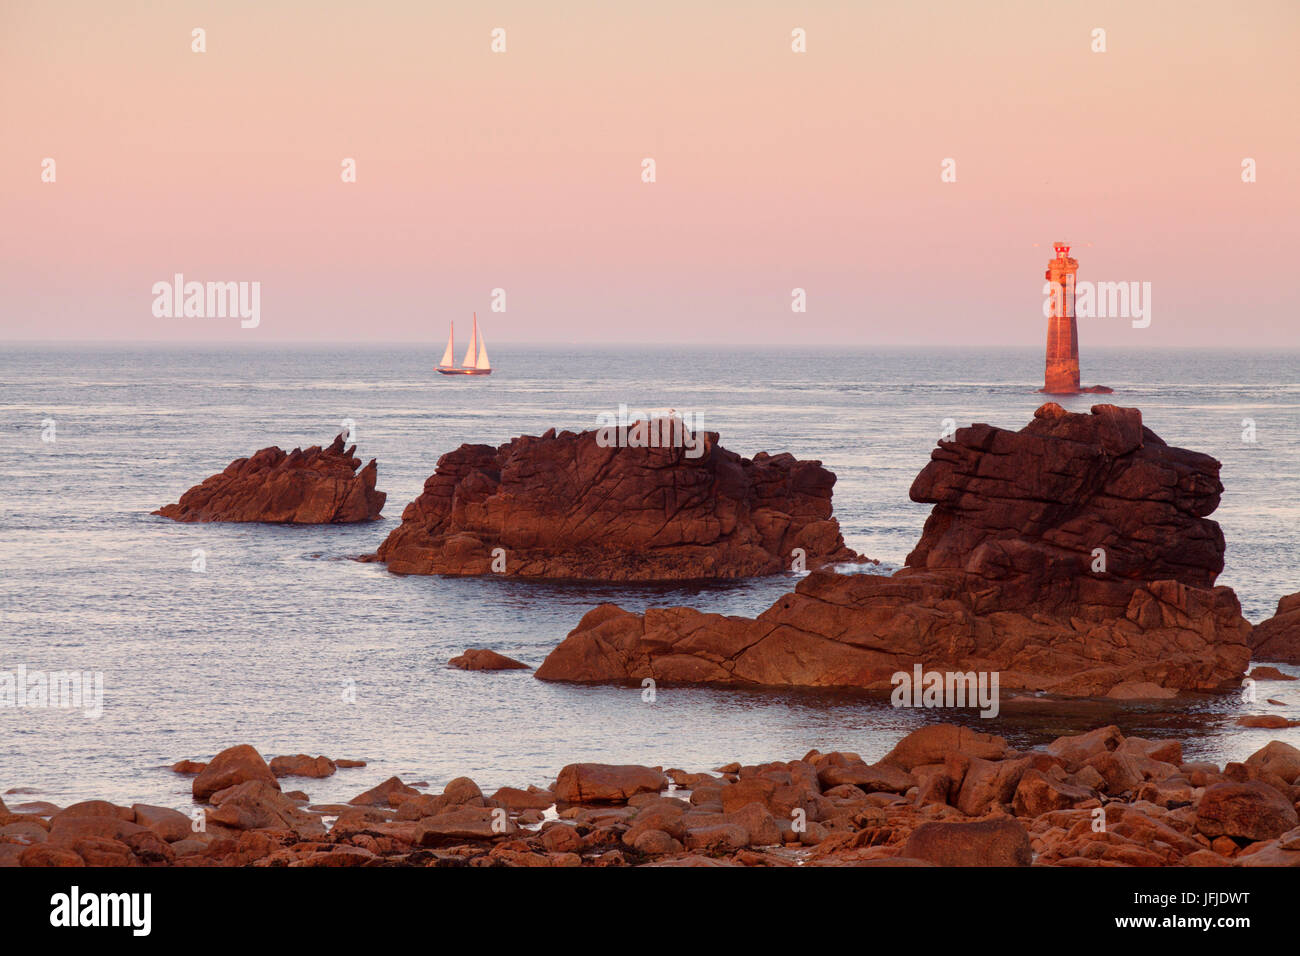 The Jument lighthouse at sunrise, off the island of Ouessant, France, Stock Photo